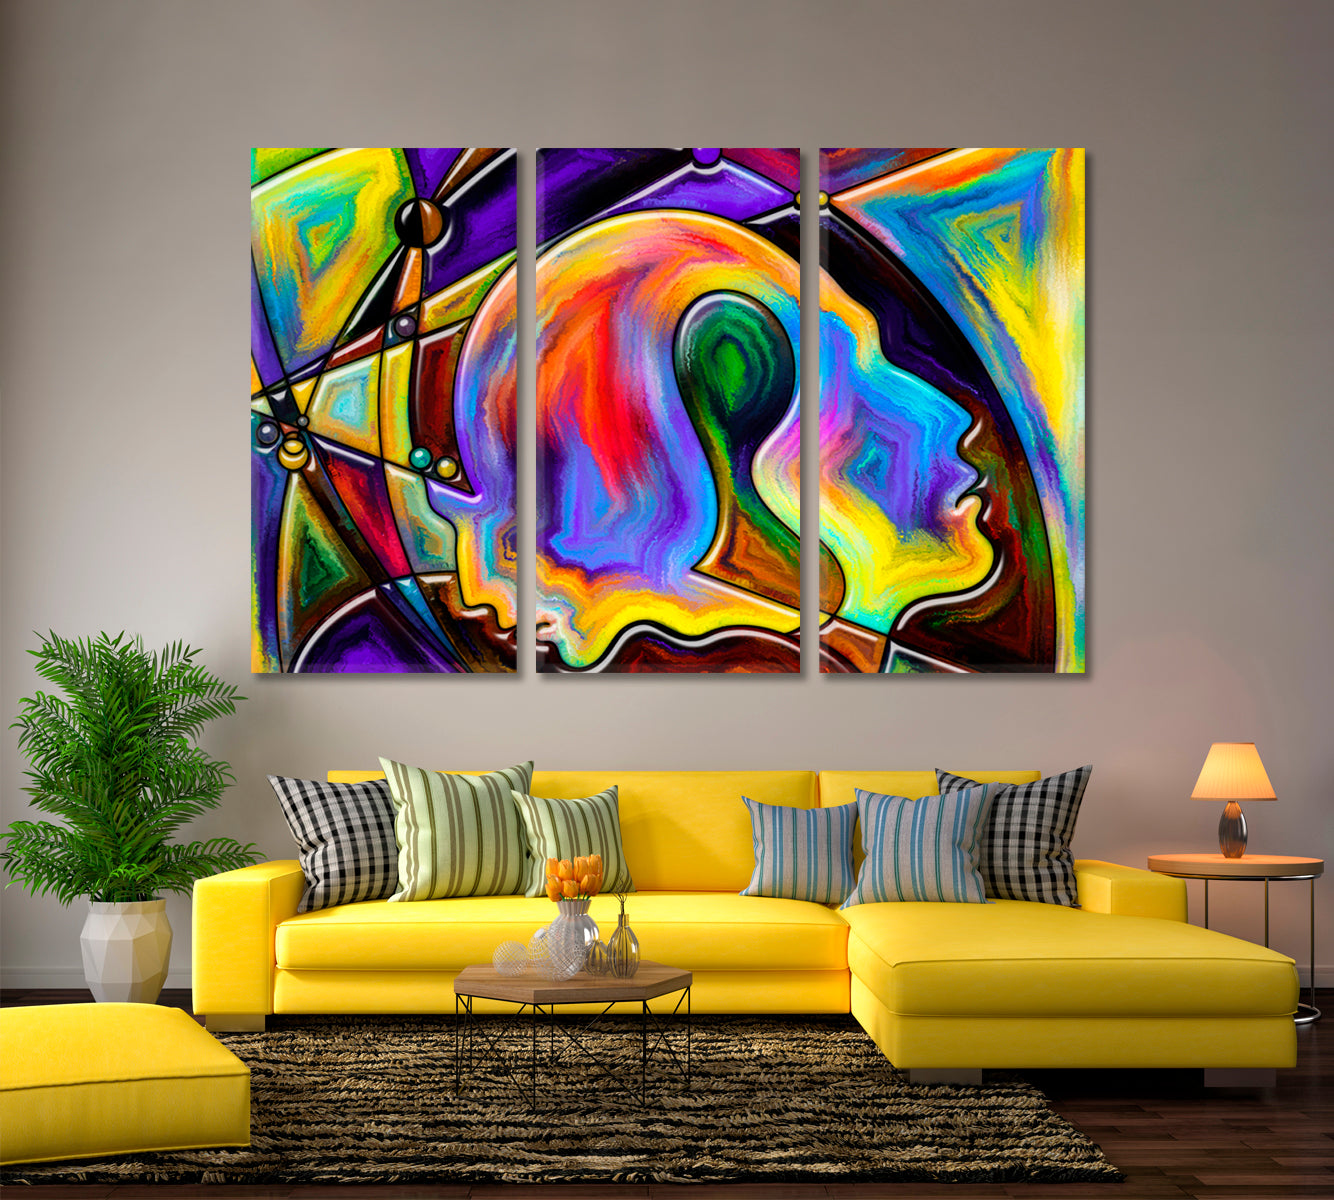 Inside Forms Being, Colorful Stained Glass Lines Contemporary Art Artesty 3 panels 36" x 24" 